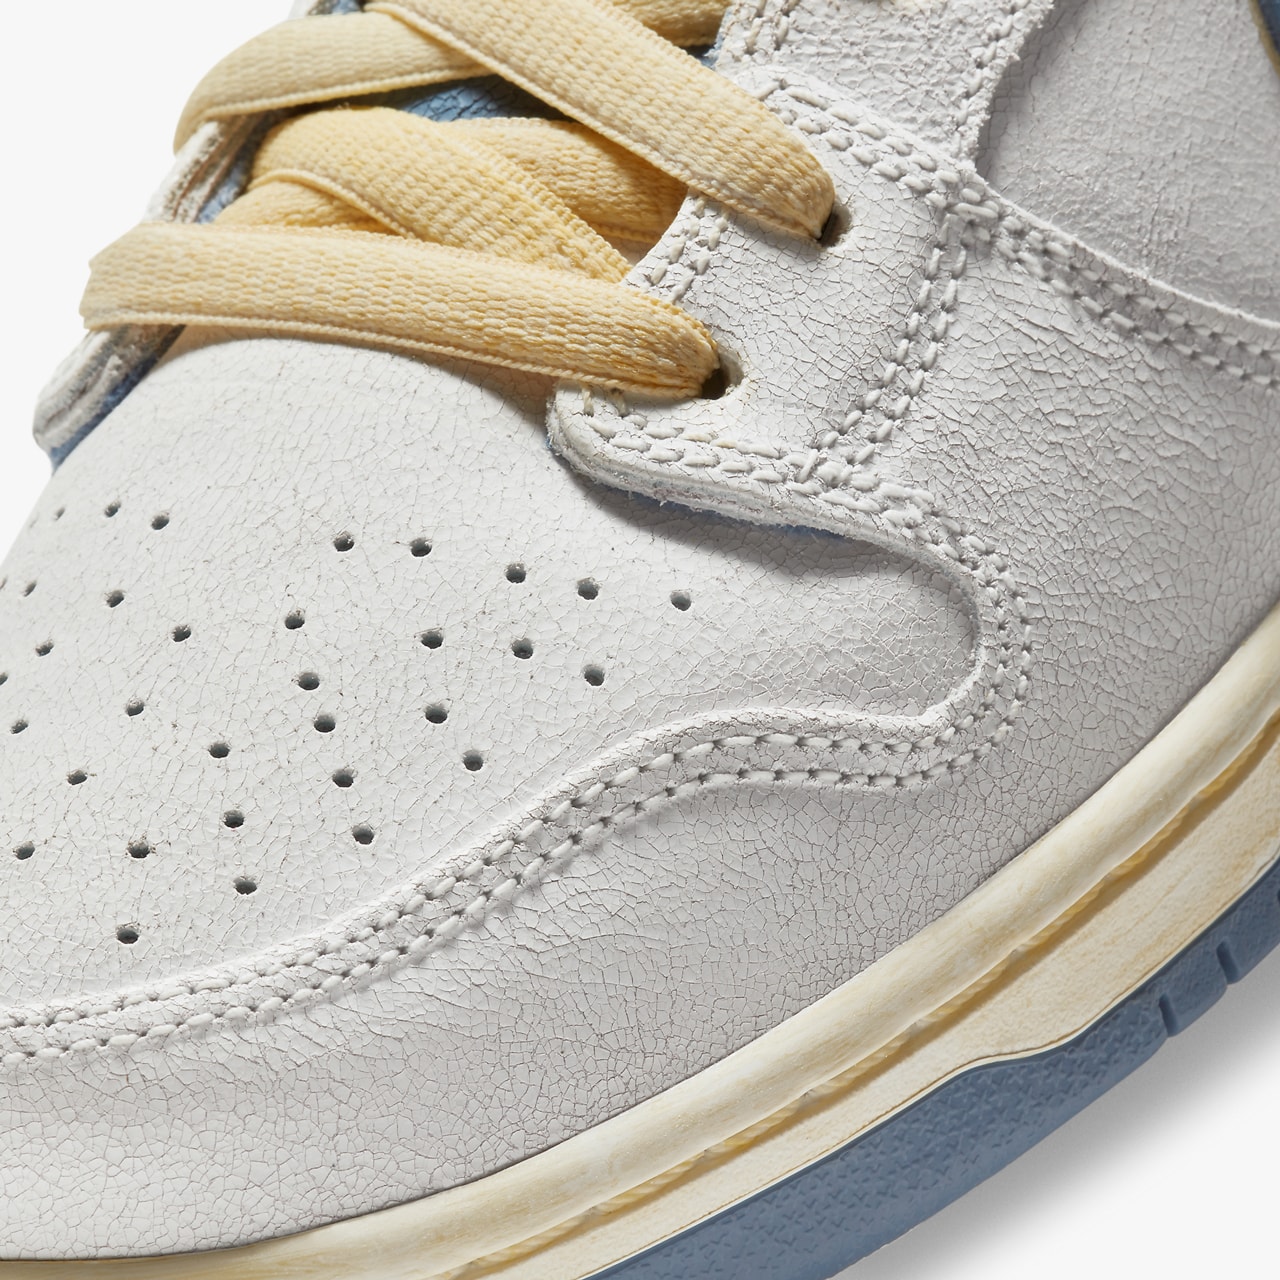 atlas nike sb skateboarding dunk high lost at sea cream white yellow blue cz3334 100 official release date info photos price store list buying guide